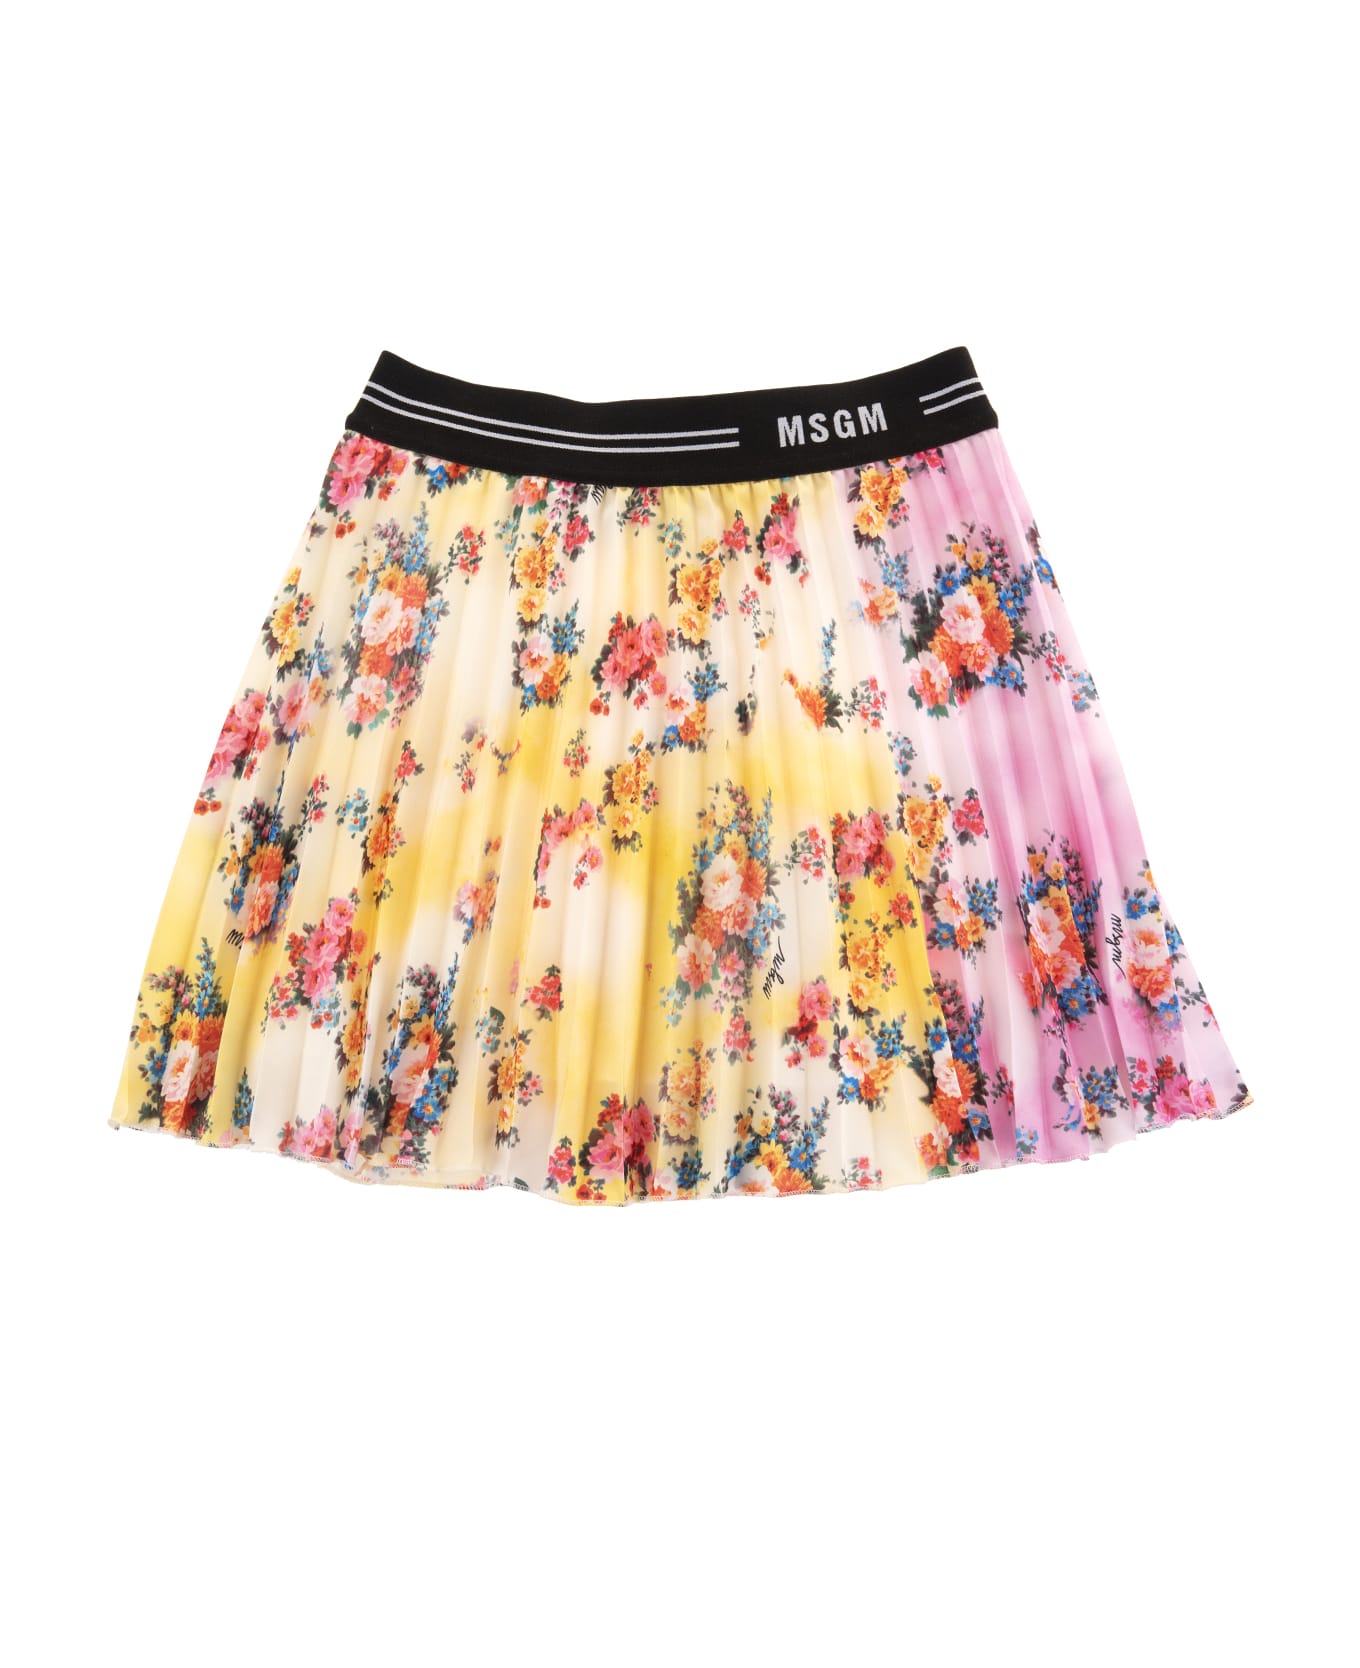 MSGM Multicolored Pleated Skirt With Floral Print - MULTICOLOR